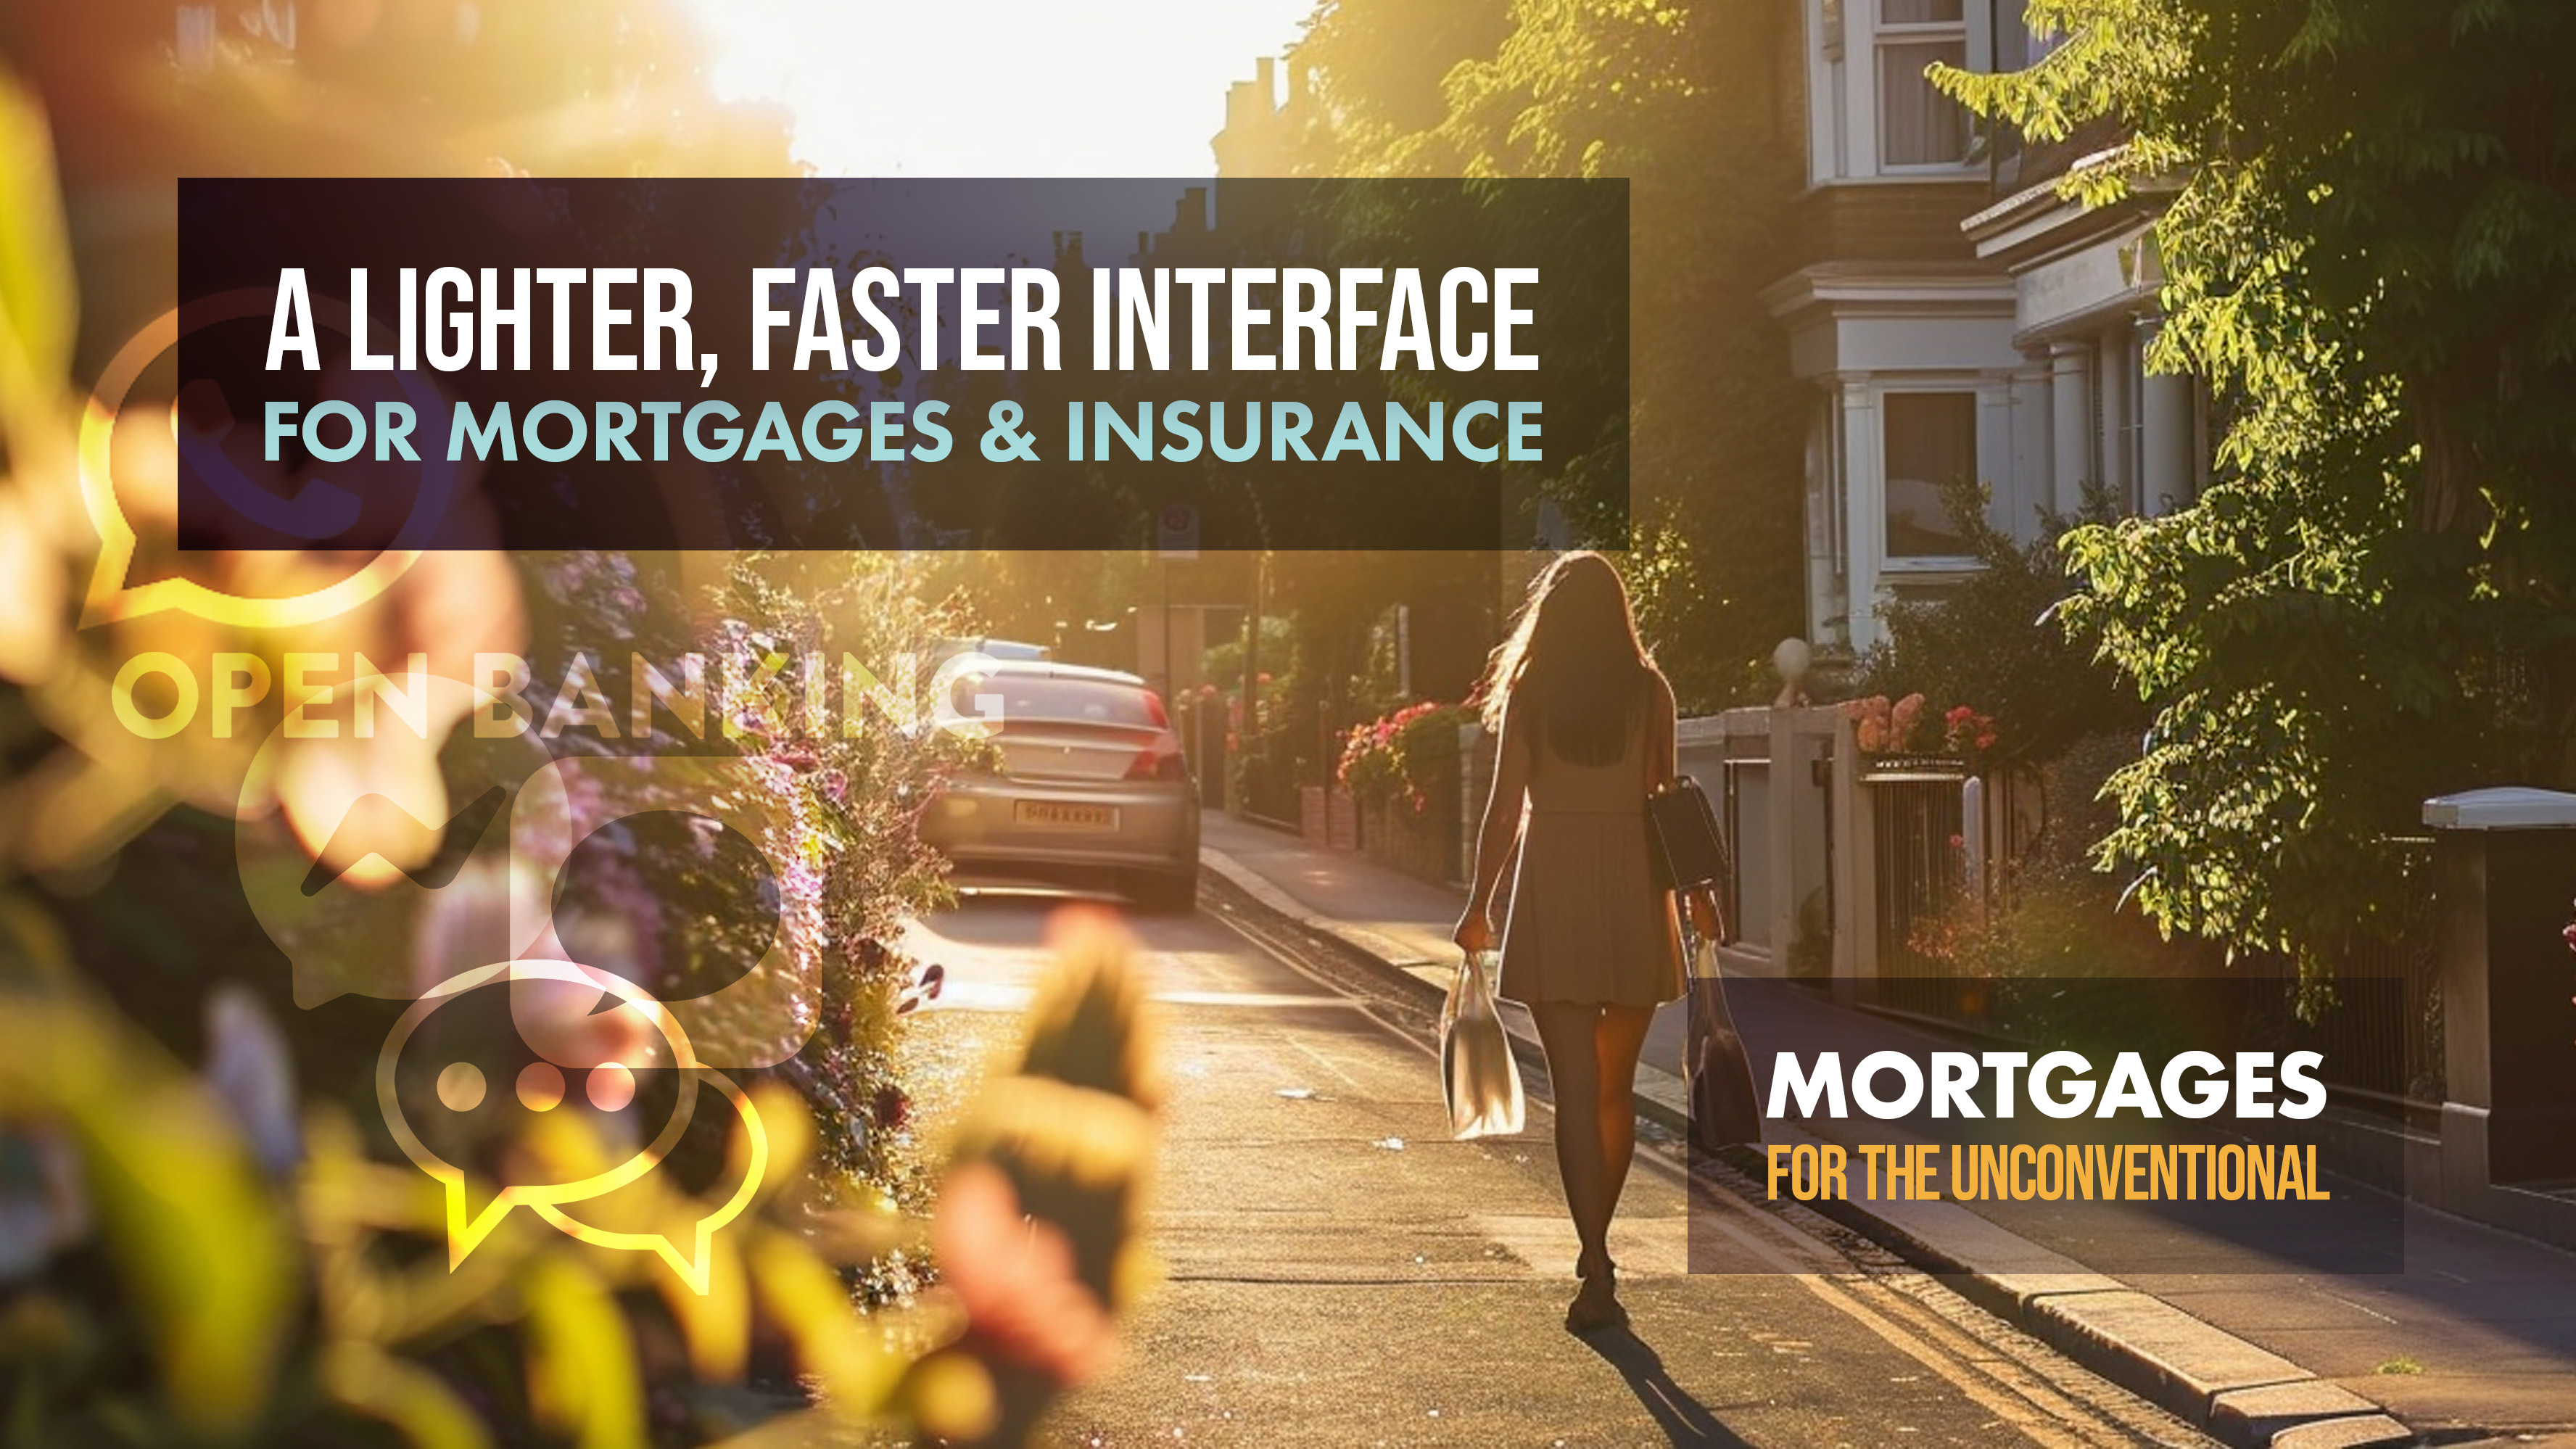 Revolutionary technology for the mortgage client